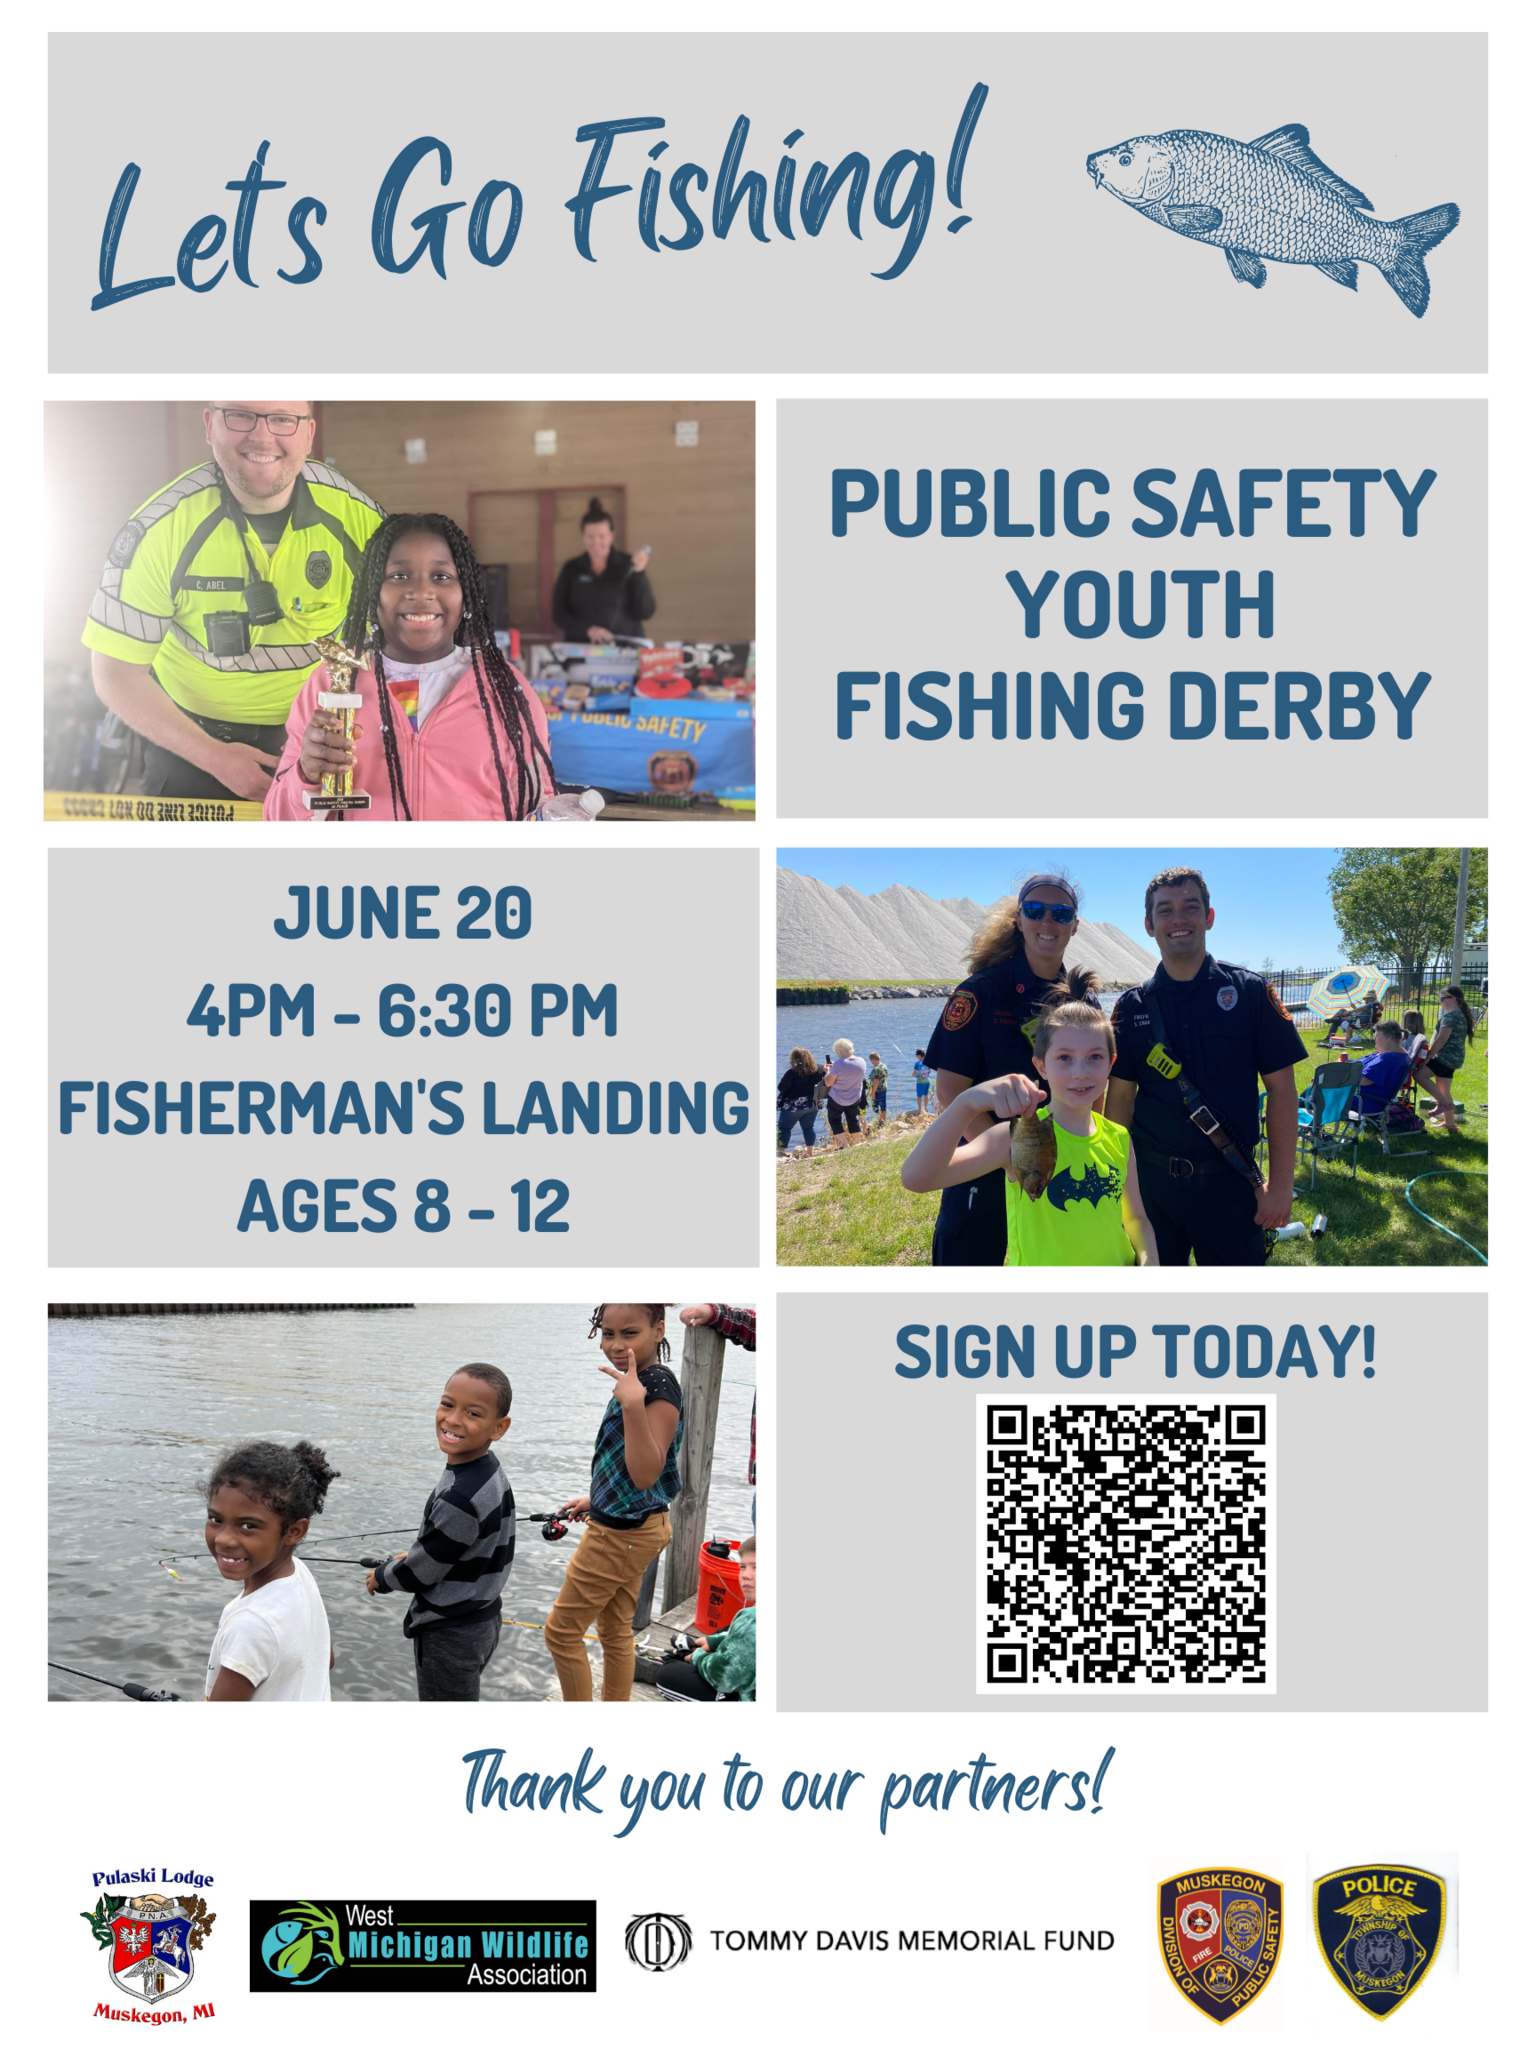 Let's Go Fishing! Public Safety Youth Fishing Derby June 20, 4 pm - 6:30 pm Fisherman's Landing Ages 8-12